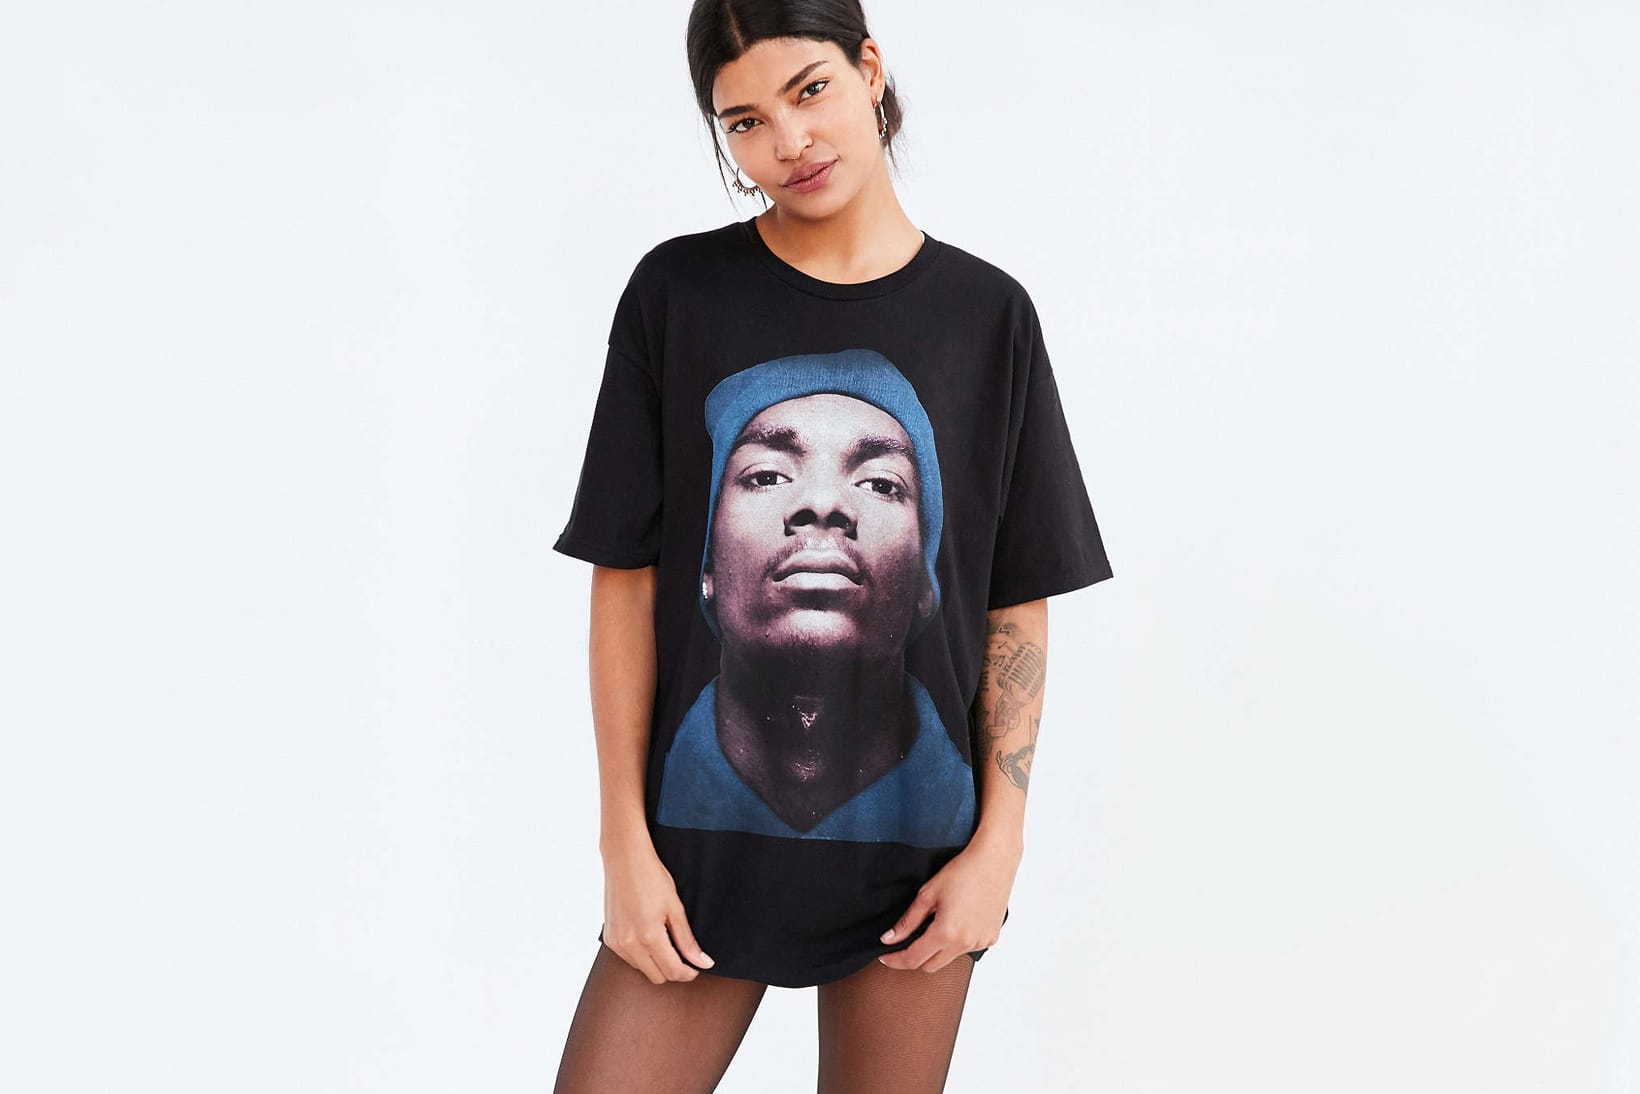 Urban Outfitters Version of Vetements' Snoop Dogg T-Shirt Is $24